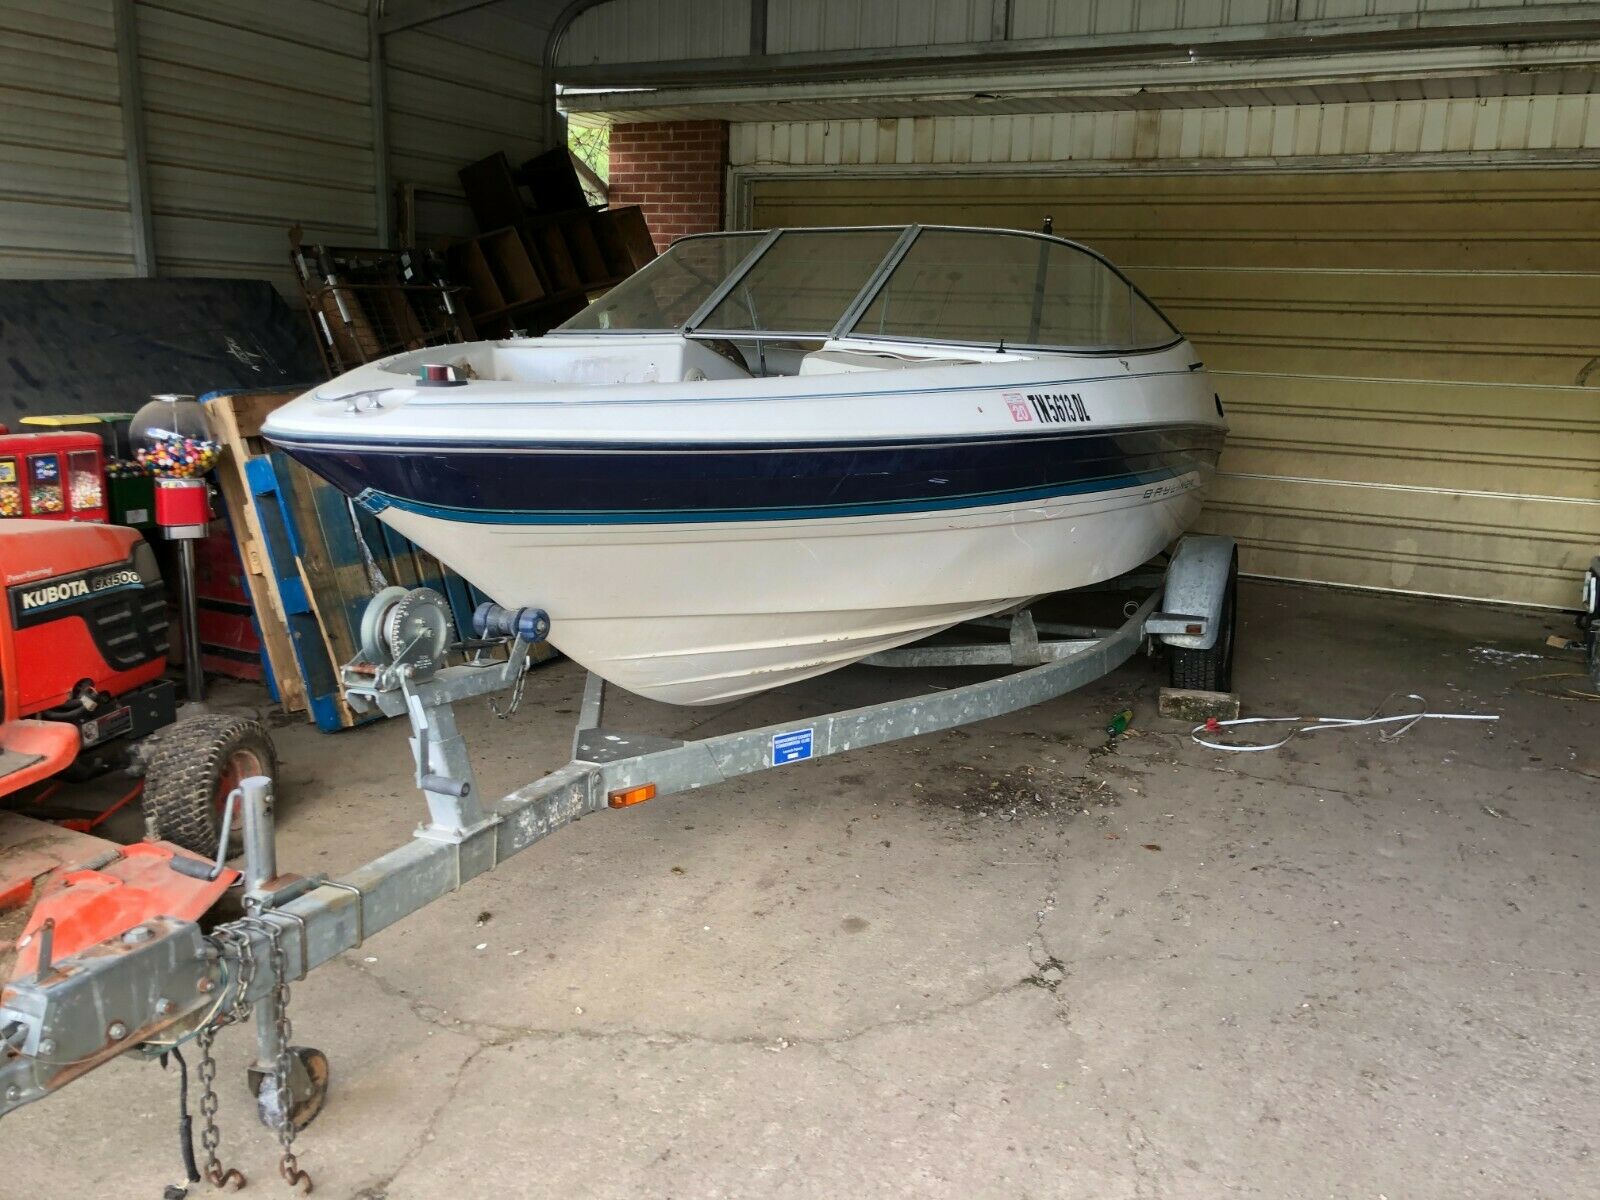 Bayliner 1995 for sale for $1 - Boats-from-USA.com